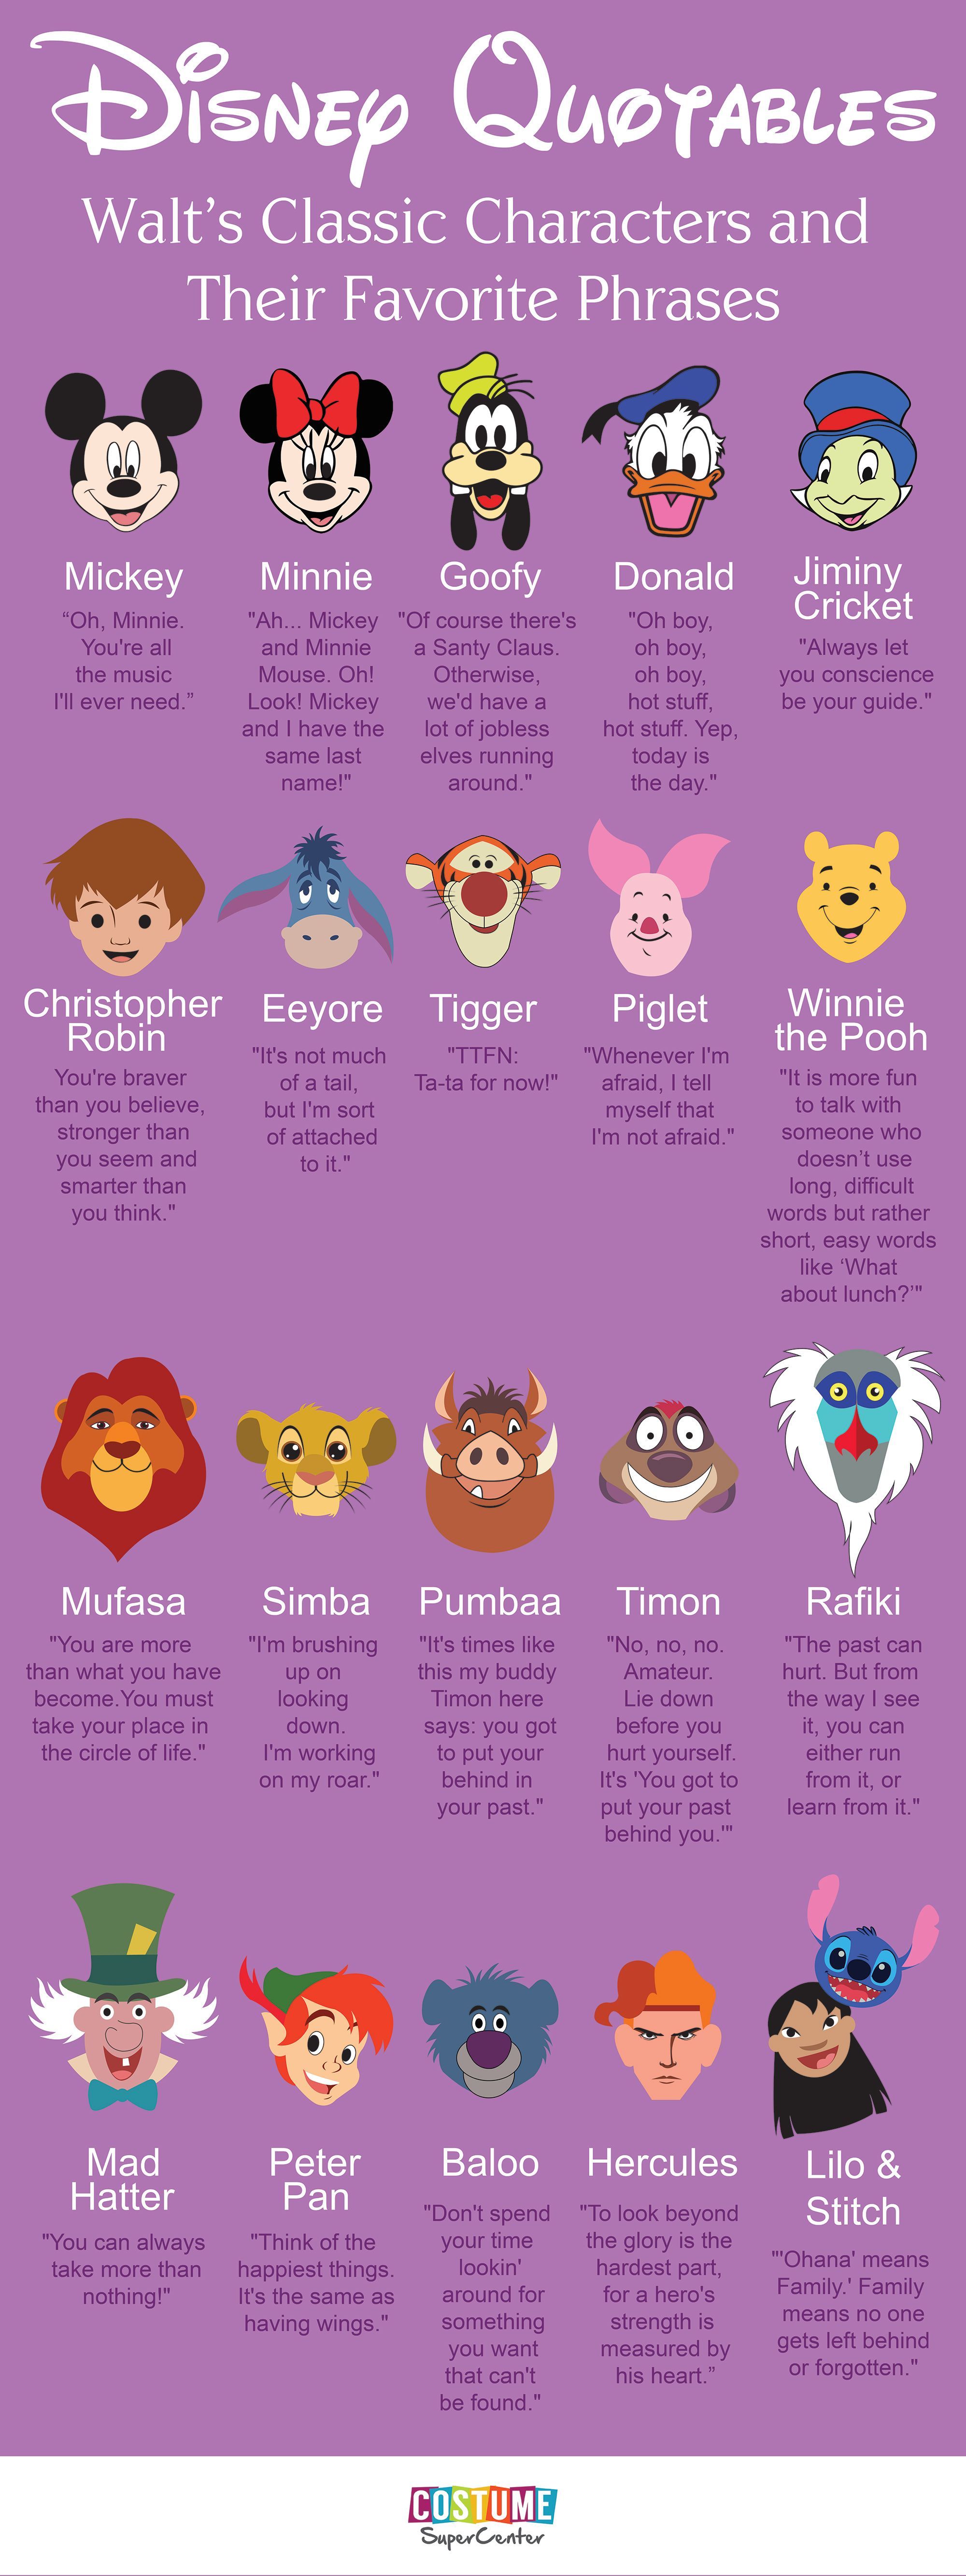 Quotes from your favorite Disney characters all on one infographic.